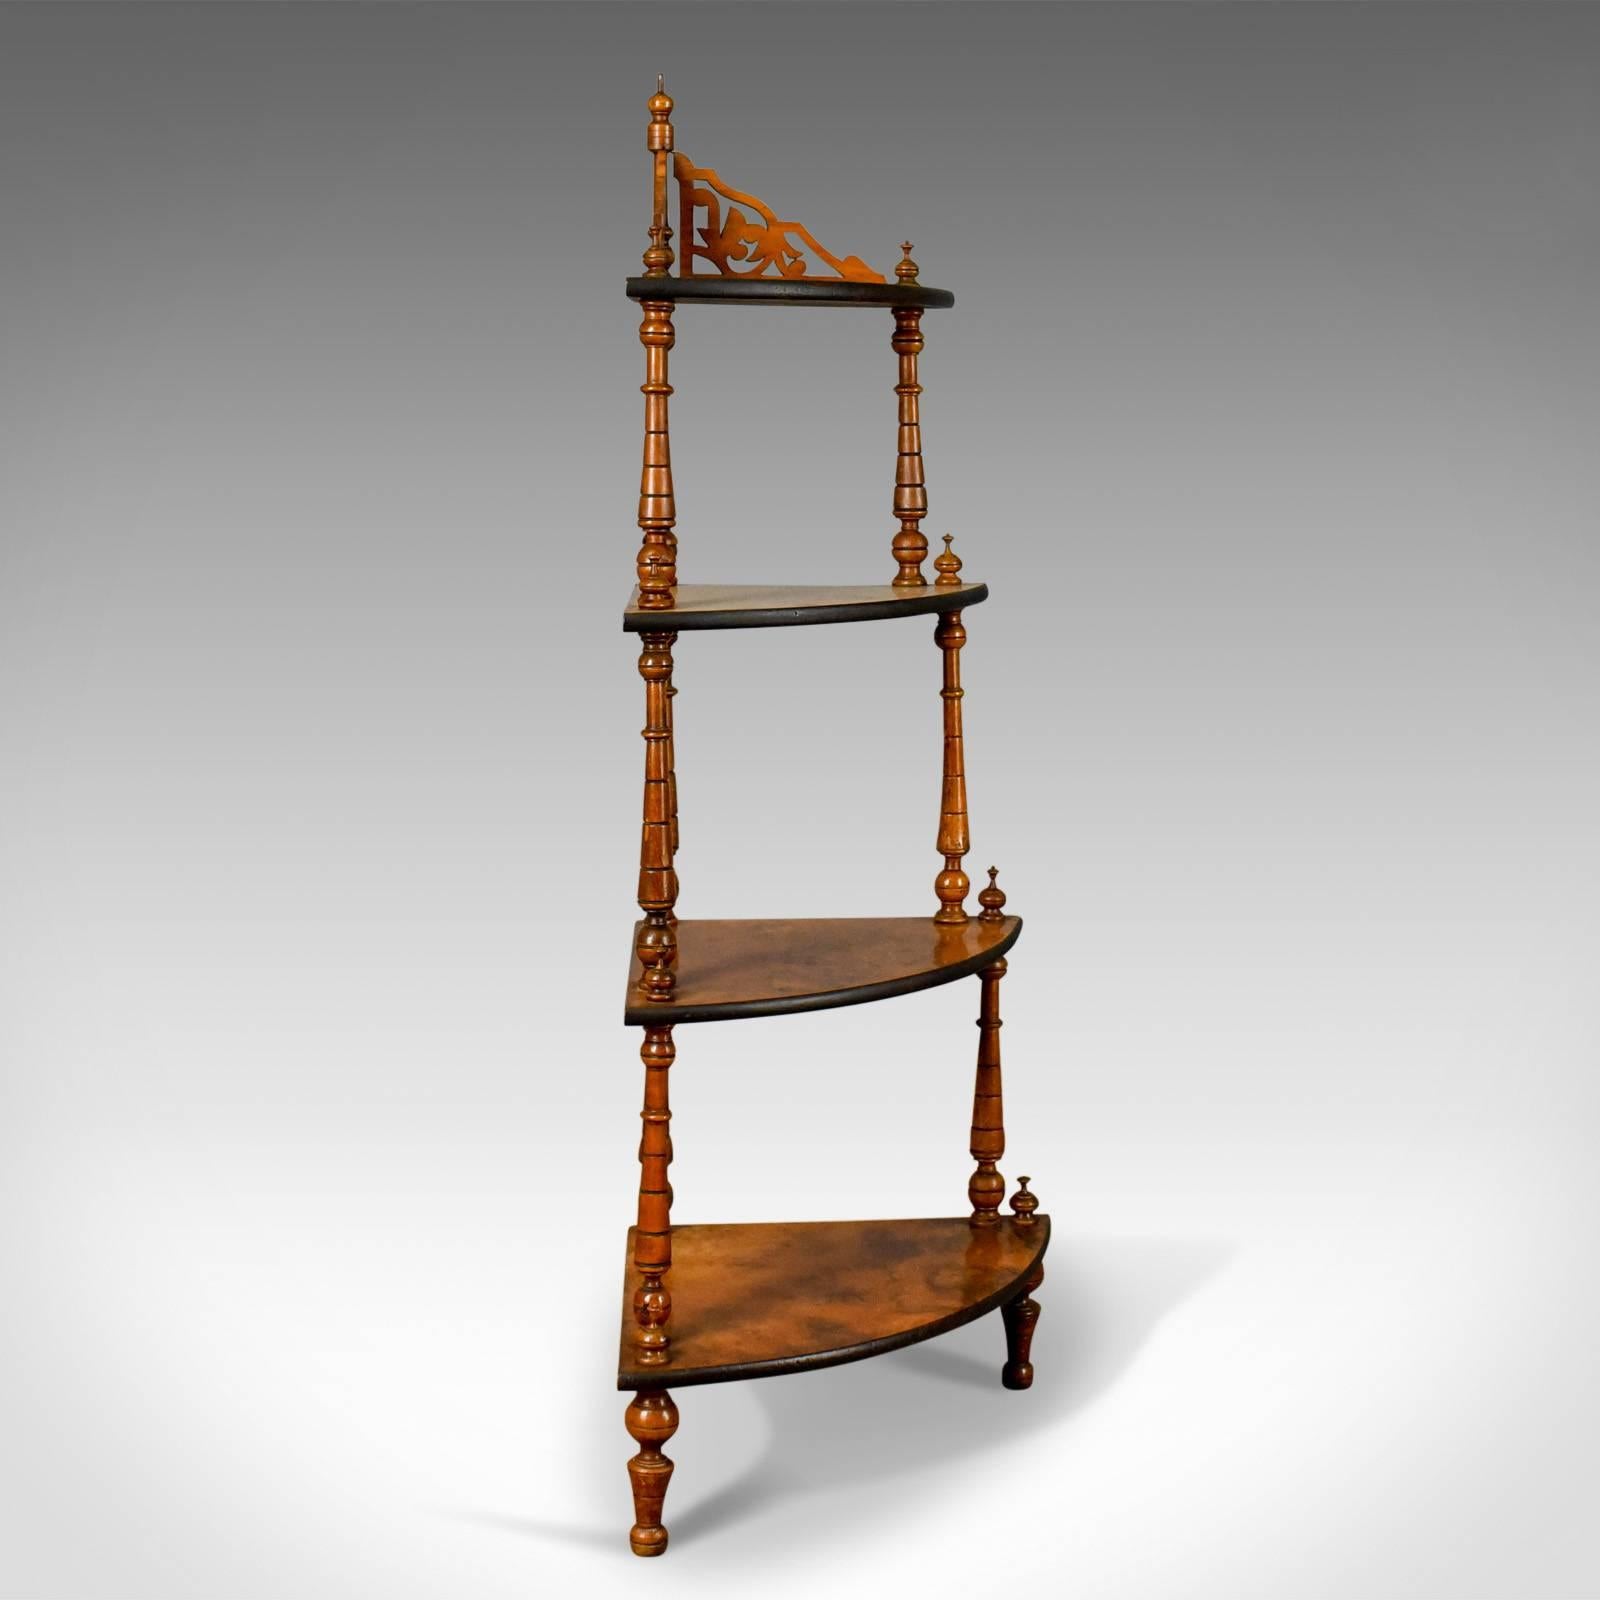 This is an antique whatnot, an English, Victorian, burr walnut, four-tier, corner display stand dating the late 19th century, circa 1880.

Attractive, well figured, burr walnut, graduated shelves
Subtly rounded edge profiles with an ebonised